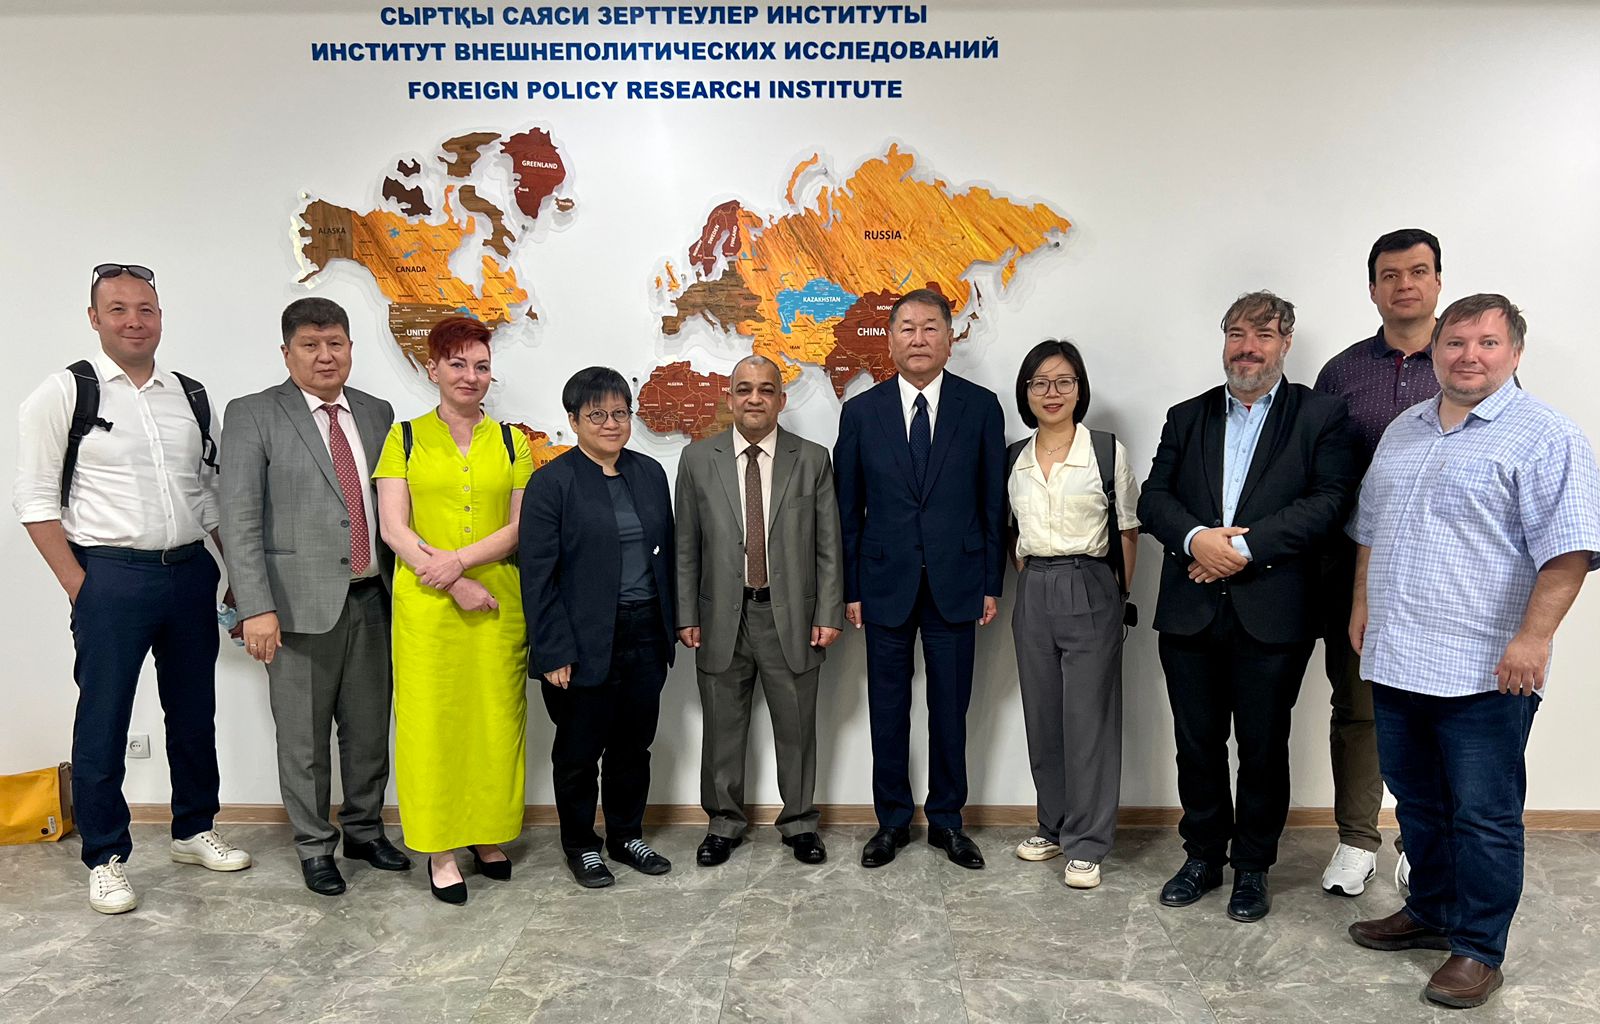 Meeting of the Chairman of the Board with representatives of foreign media